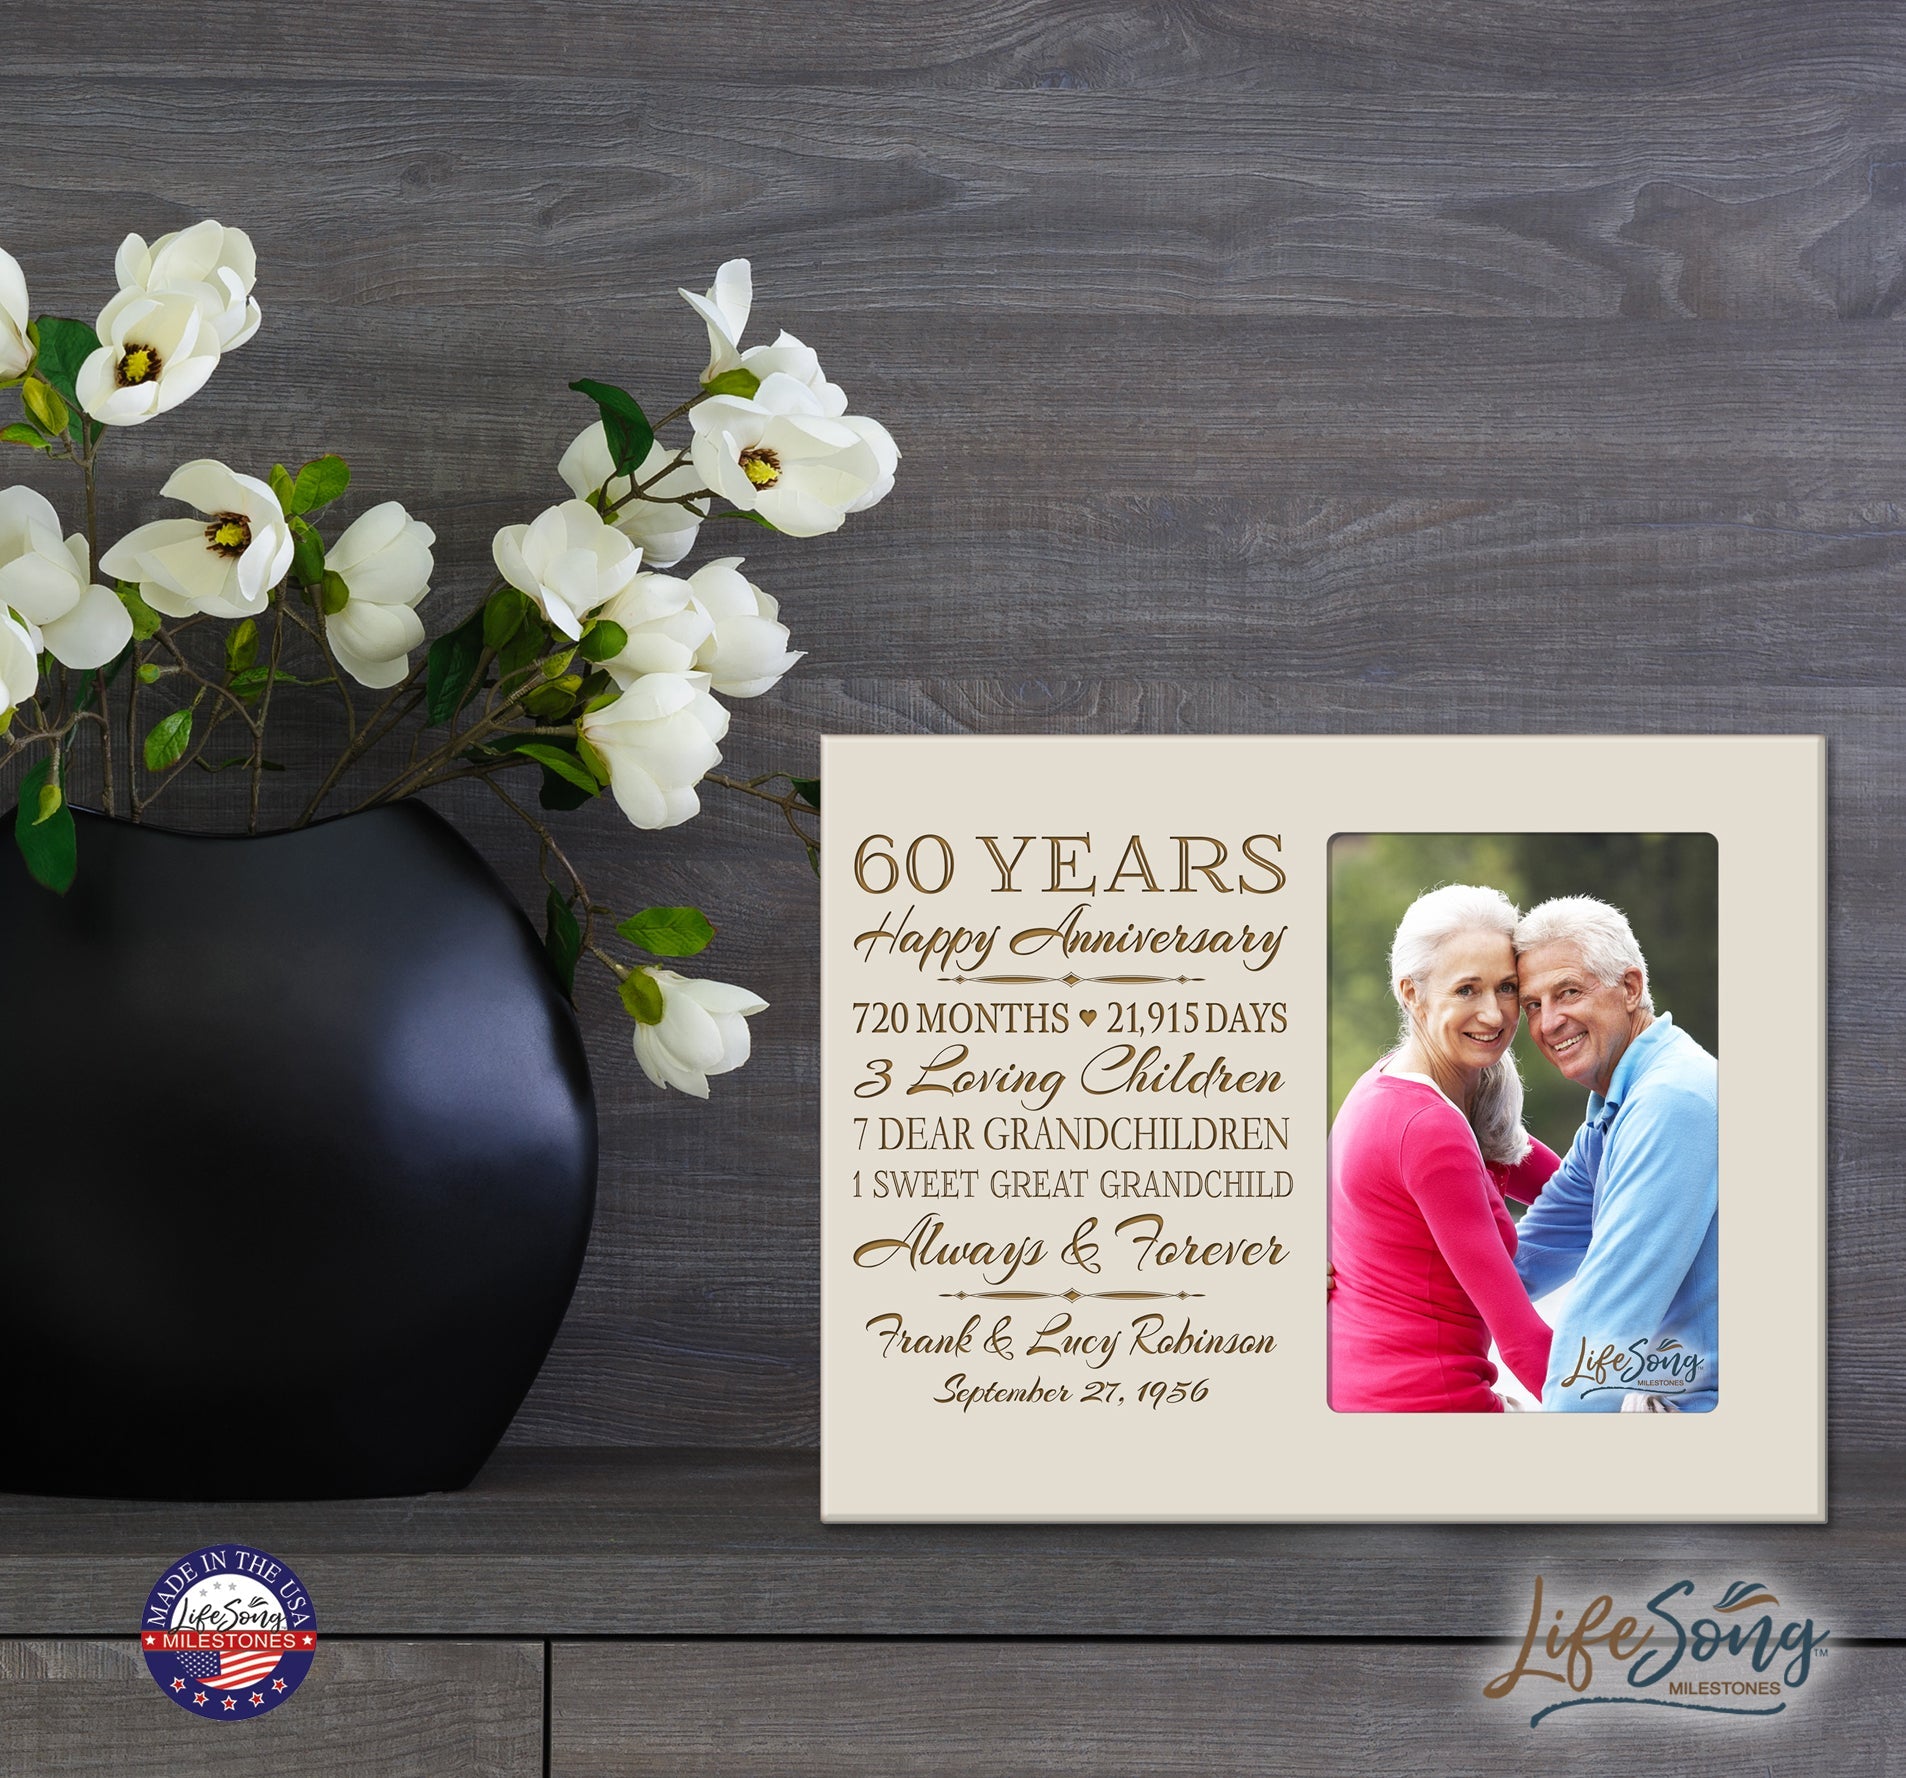 Personalized 60th Wedding Anniversary Picture Frame Gifts for Couples - Always and Forever - LifeSong Milestones